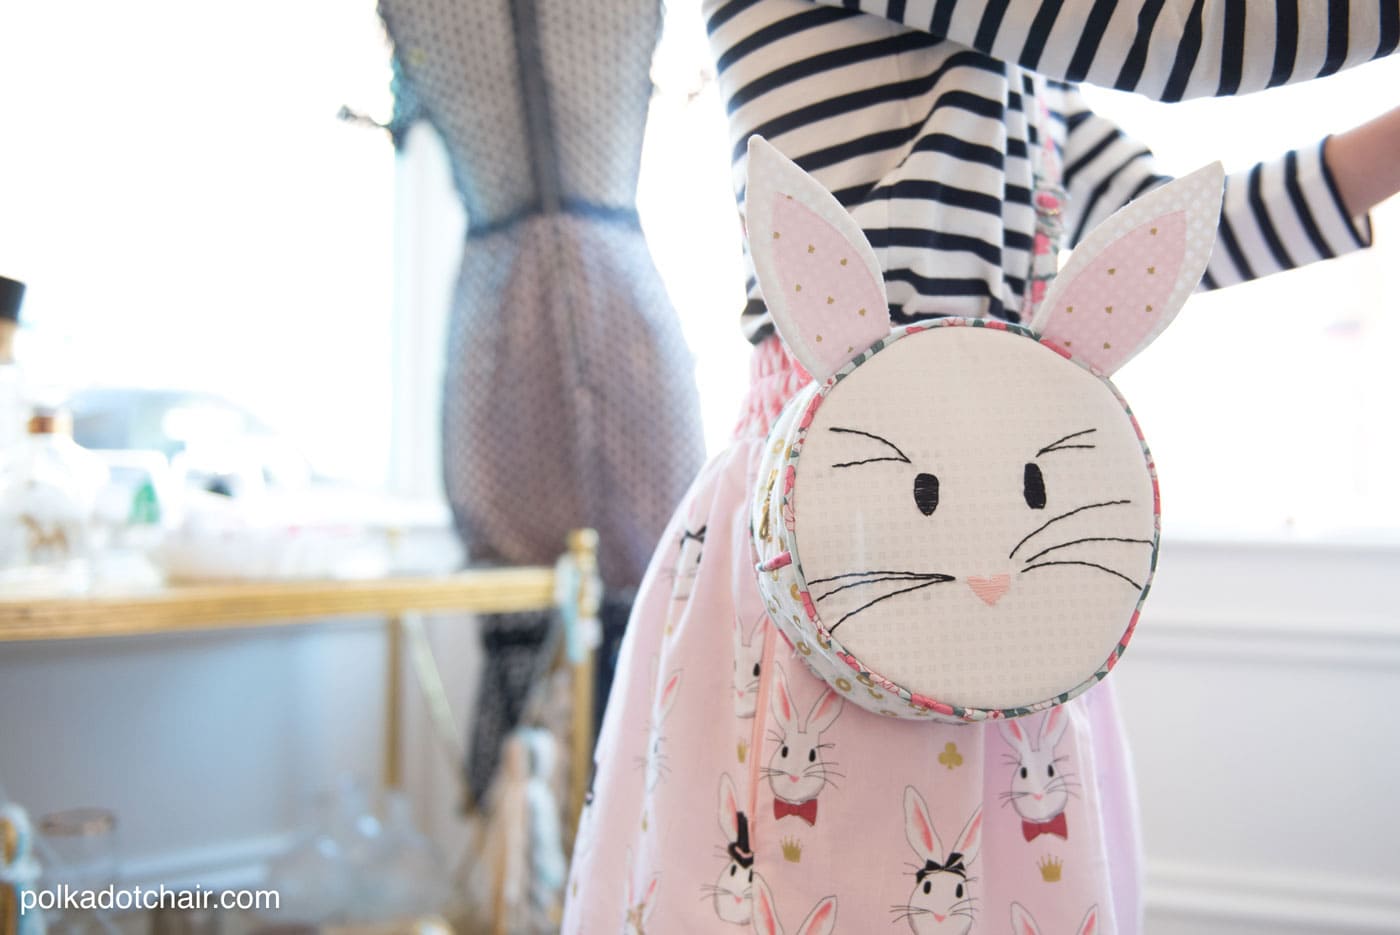 Introducing the Alice Bag Sewing Pattern. A whimsical and versatile purse sewing pattern featuring bunny ears! It can be made in two sizes and features 4 different handle style options including cross body straps!